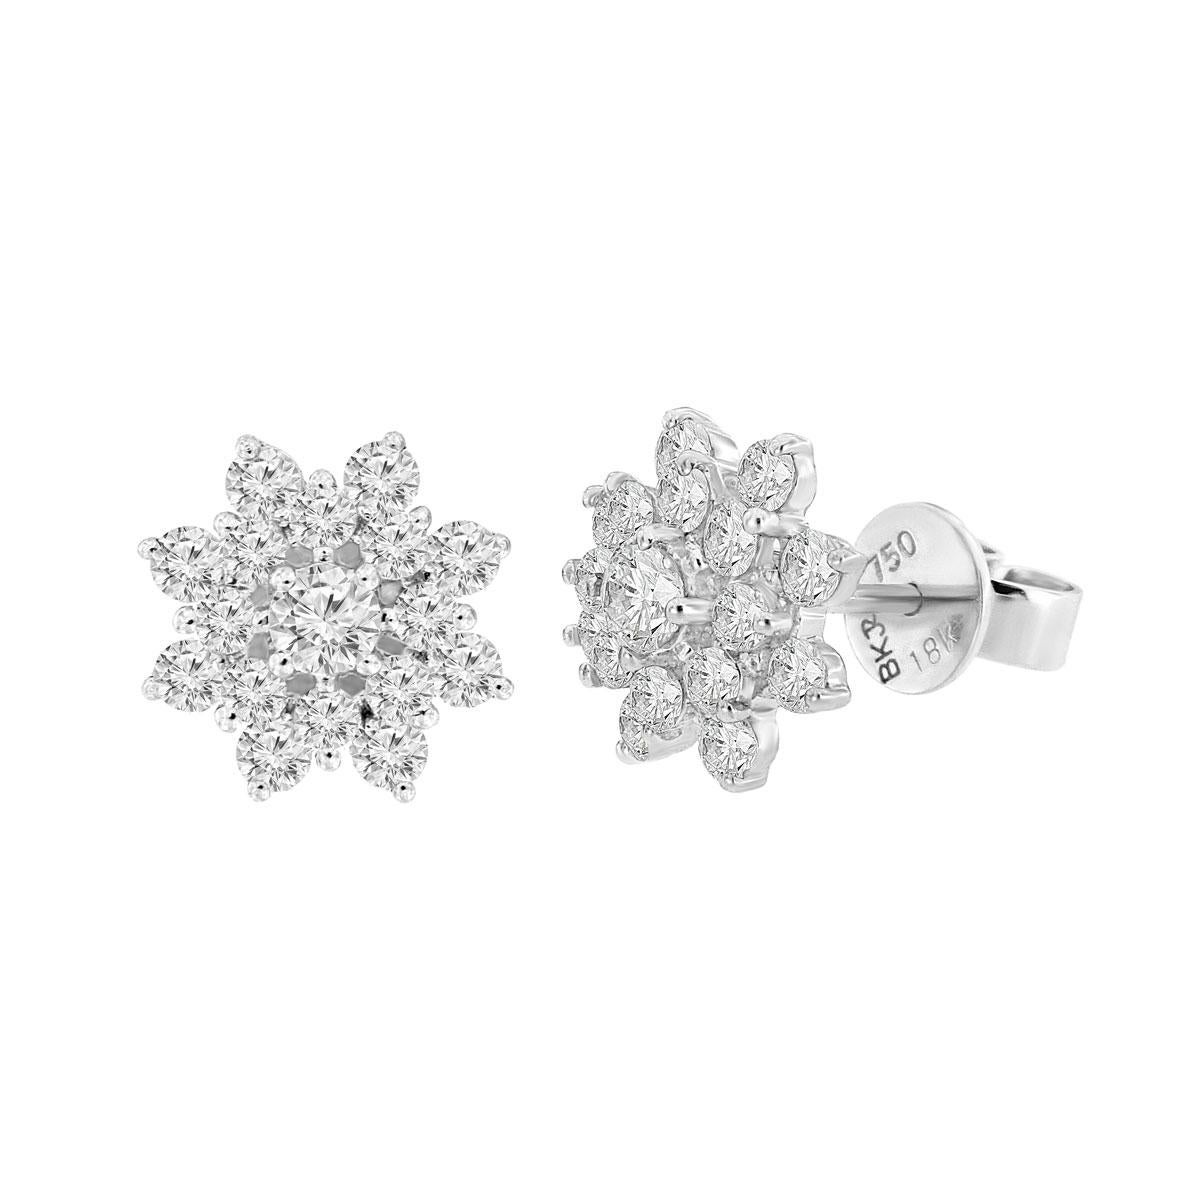 These diamond cluster earrings feature 1.00 carats of perfectly matched full cut round diamonds set in 18k white gold. Experience the Difference!

Product details: 

Center Gemstone Type: NATURAL DIAMOND
Center Gemstone Color: WHITE
Center Gemstone